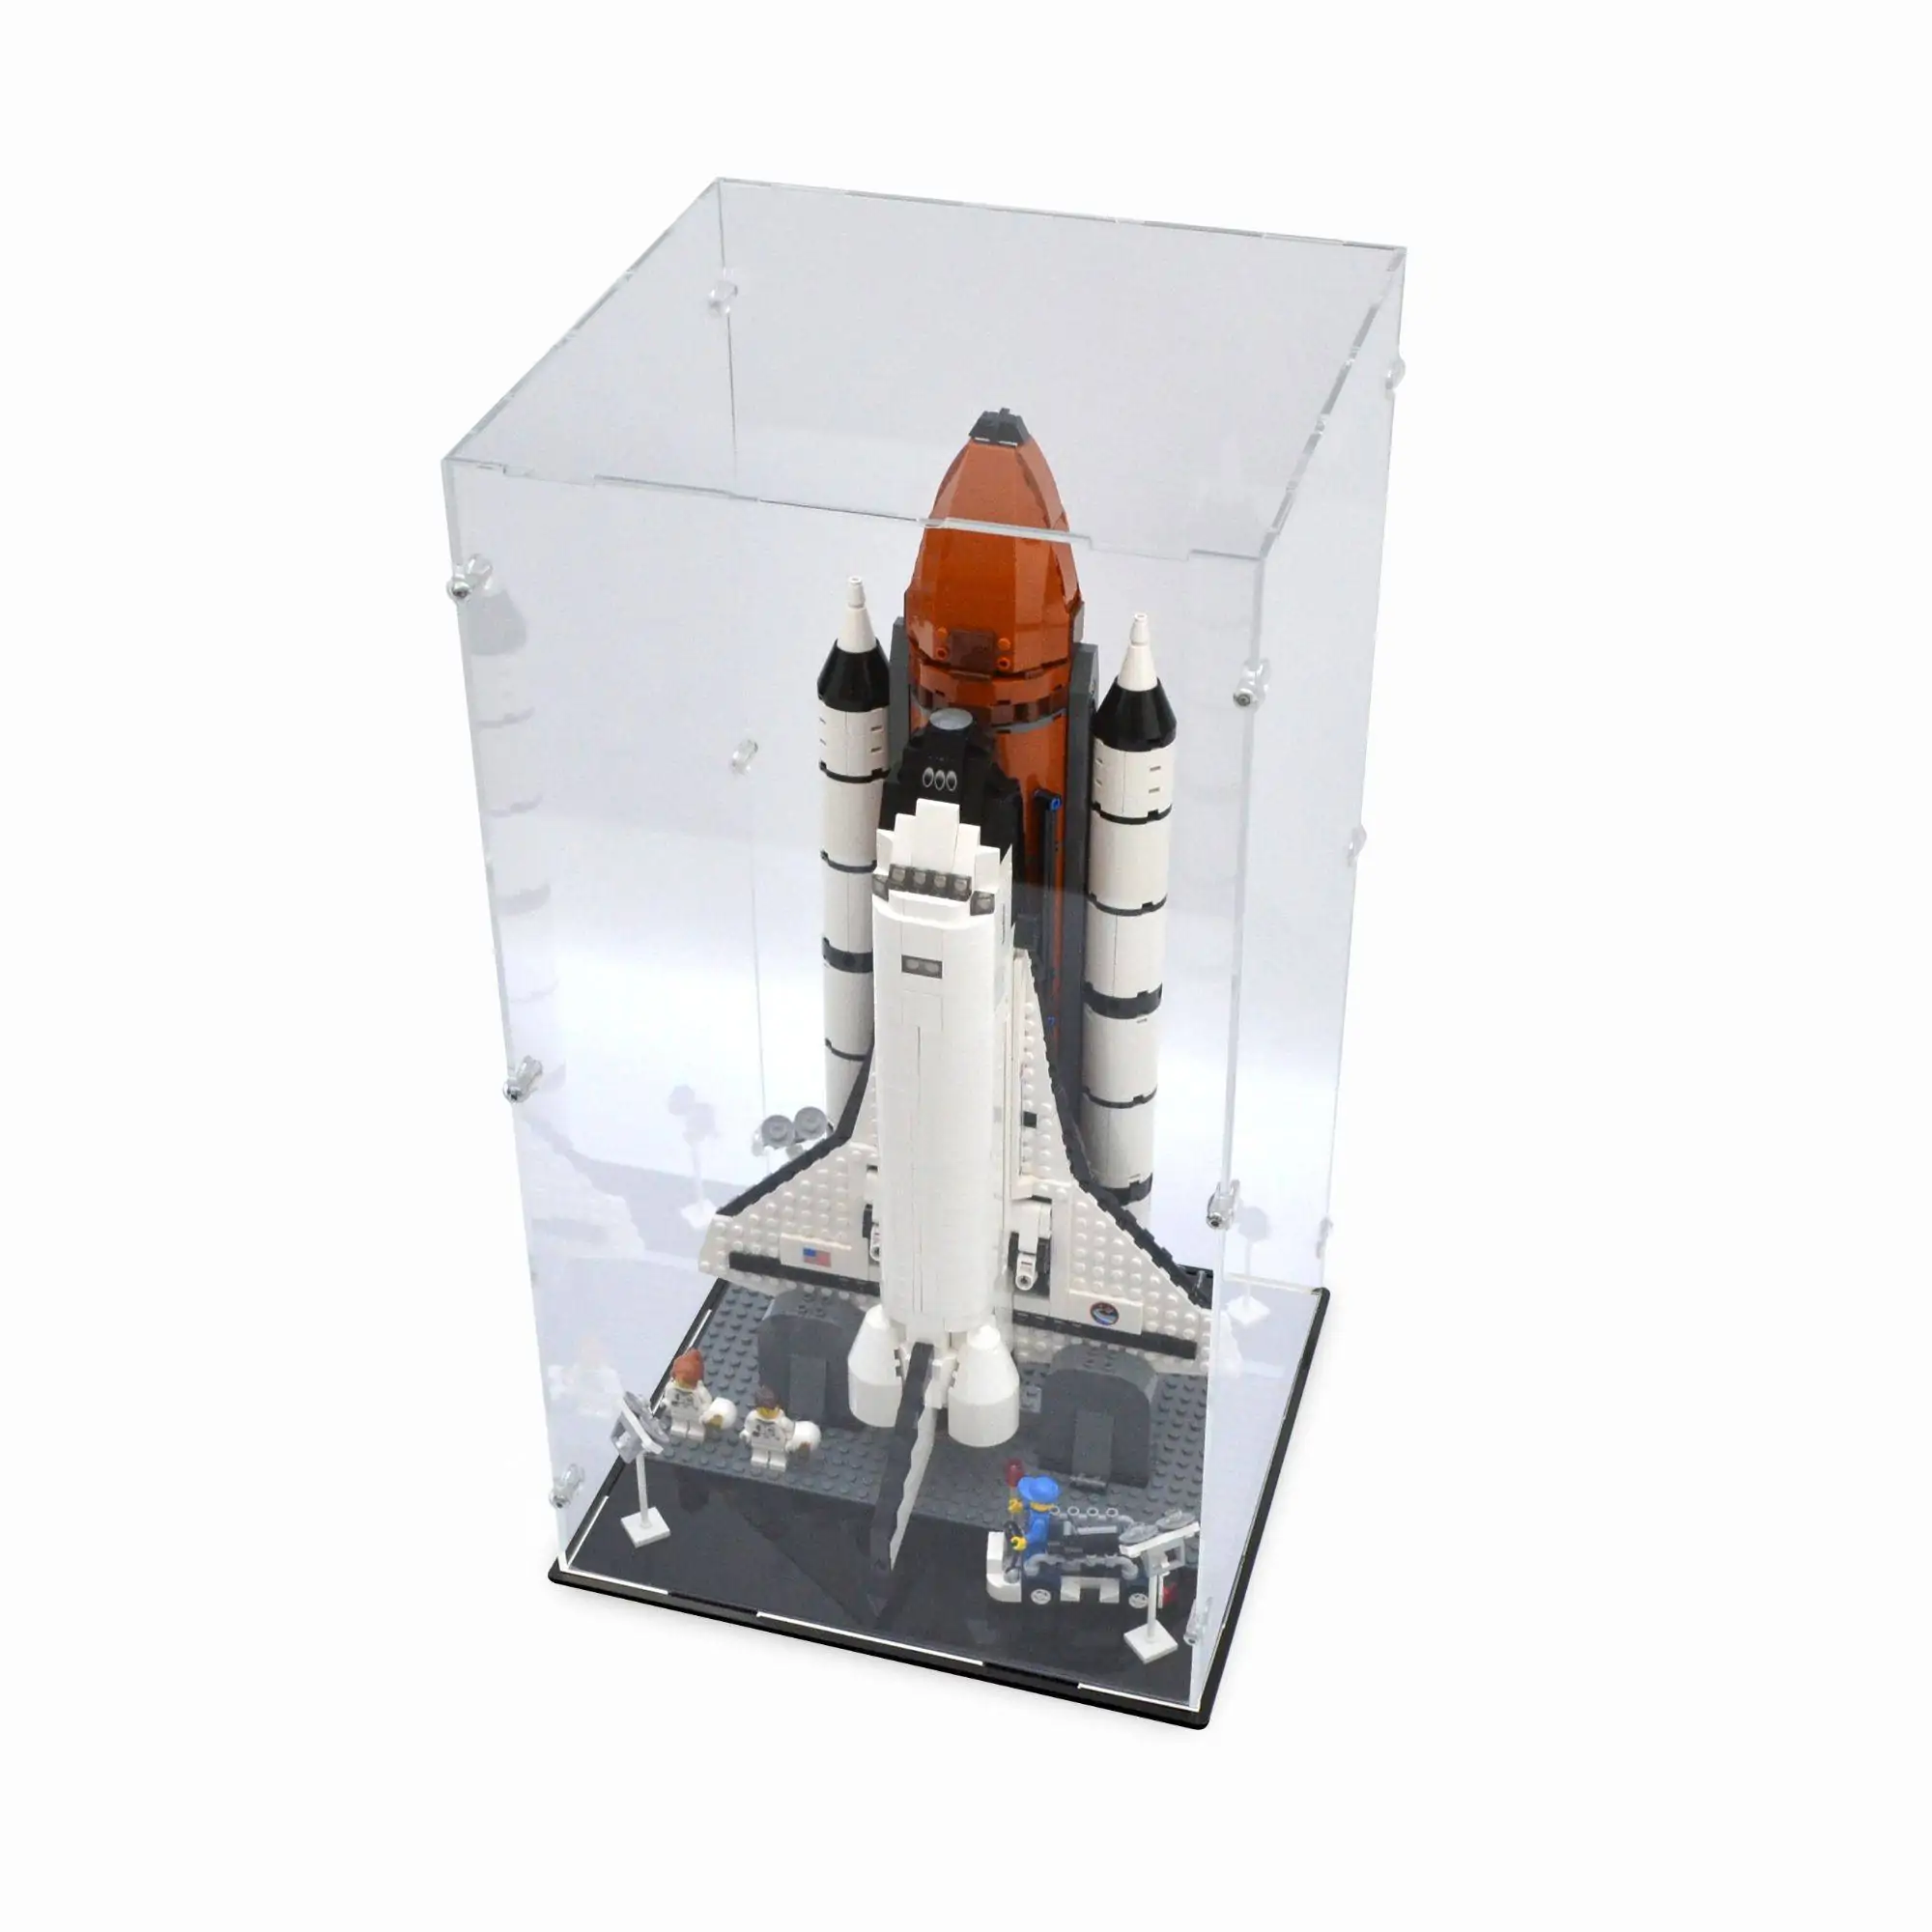 Acrylic Display for Shuttle Expedition iDisplayit